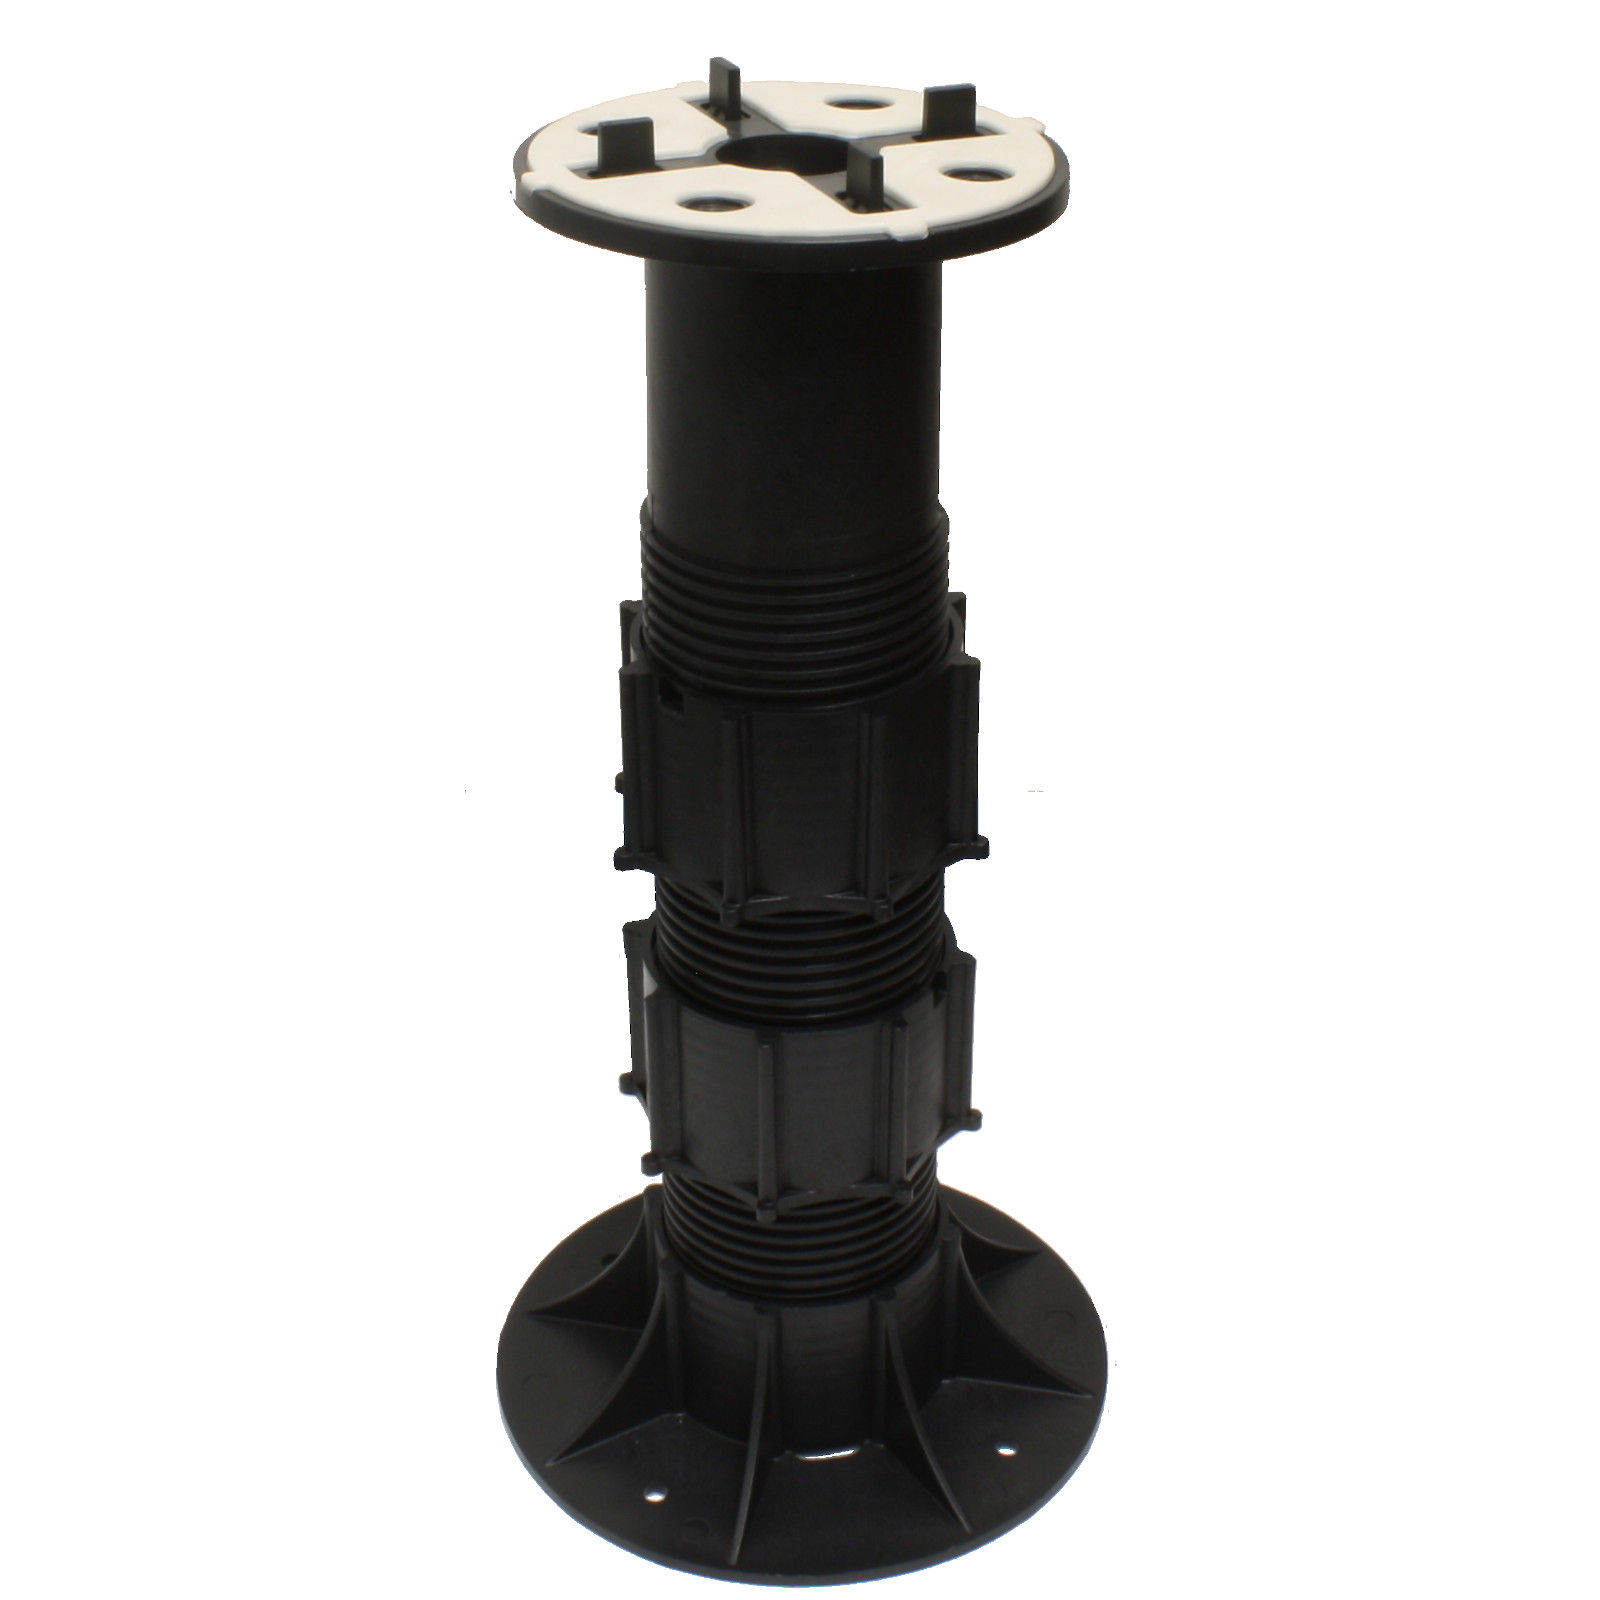 SE11 Adj Ped Support w/ Three-in-One Self Leveling Head 11.75” ‐ 15.75” (300‐400Mm)